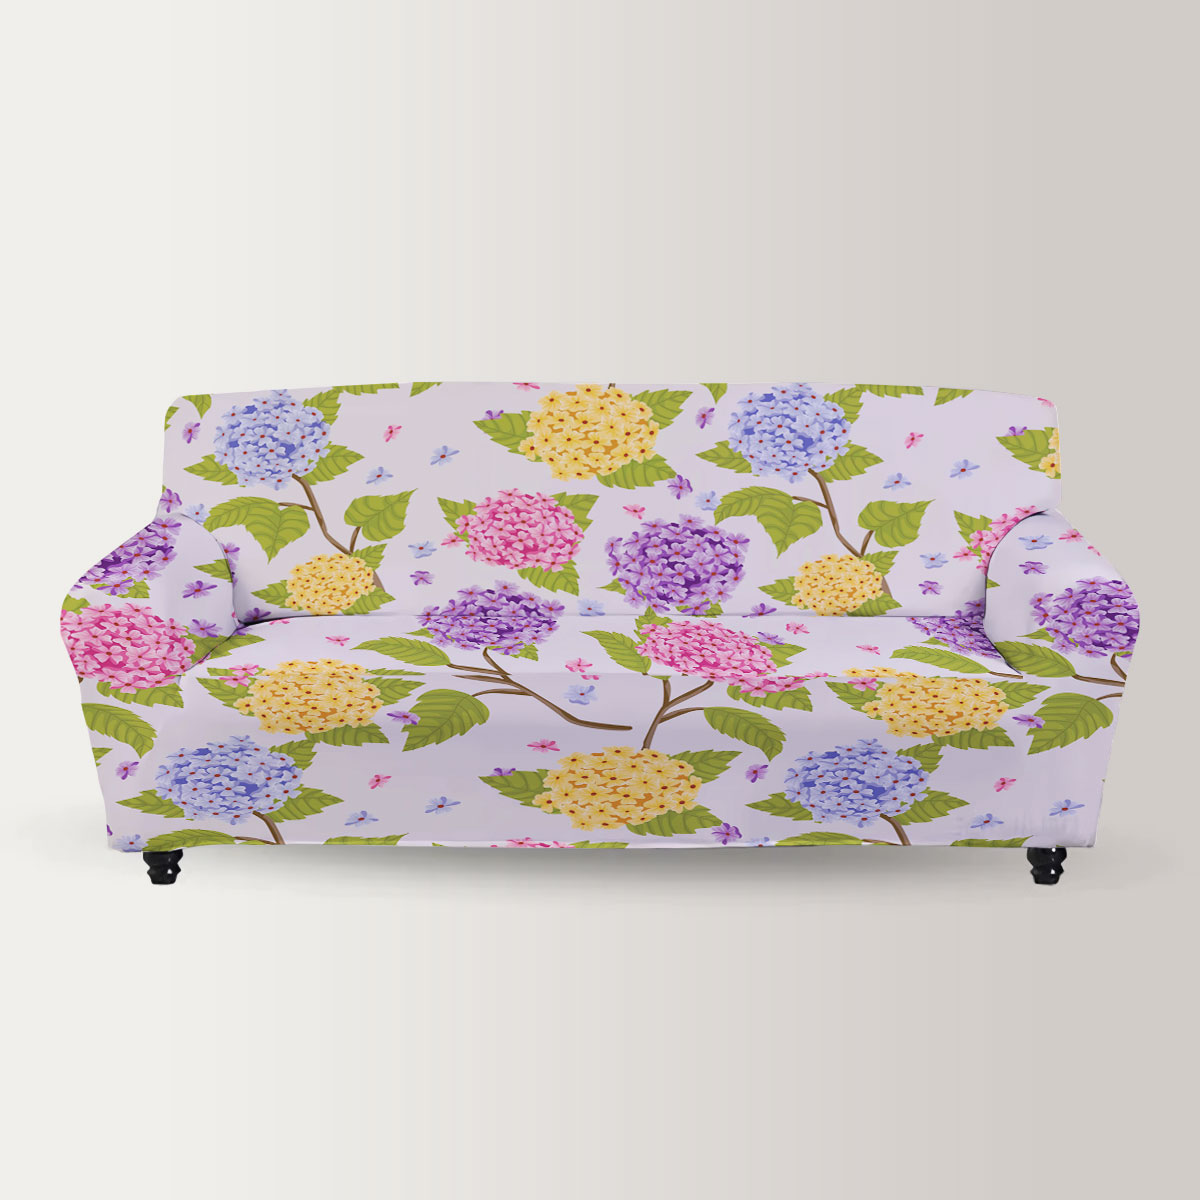 Floral Hydrangea Seamless Pattern Sofa Cover